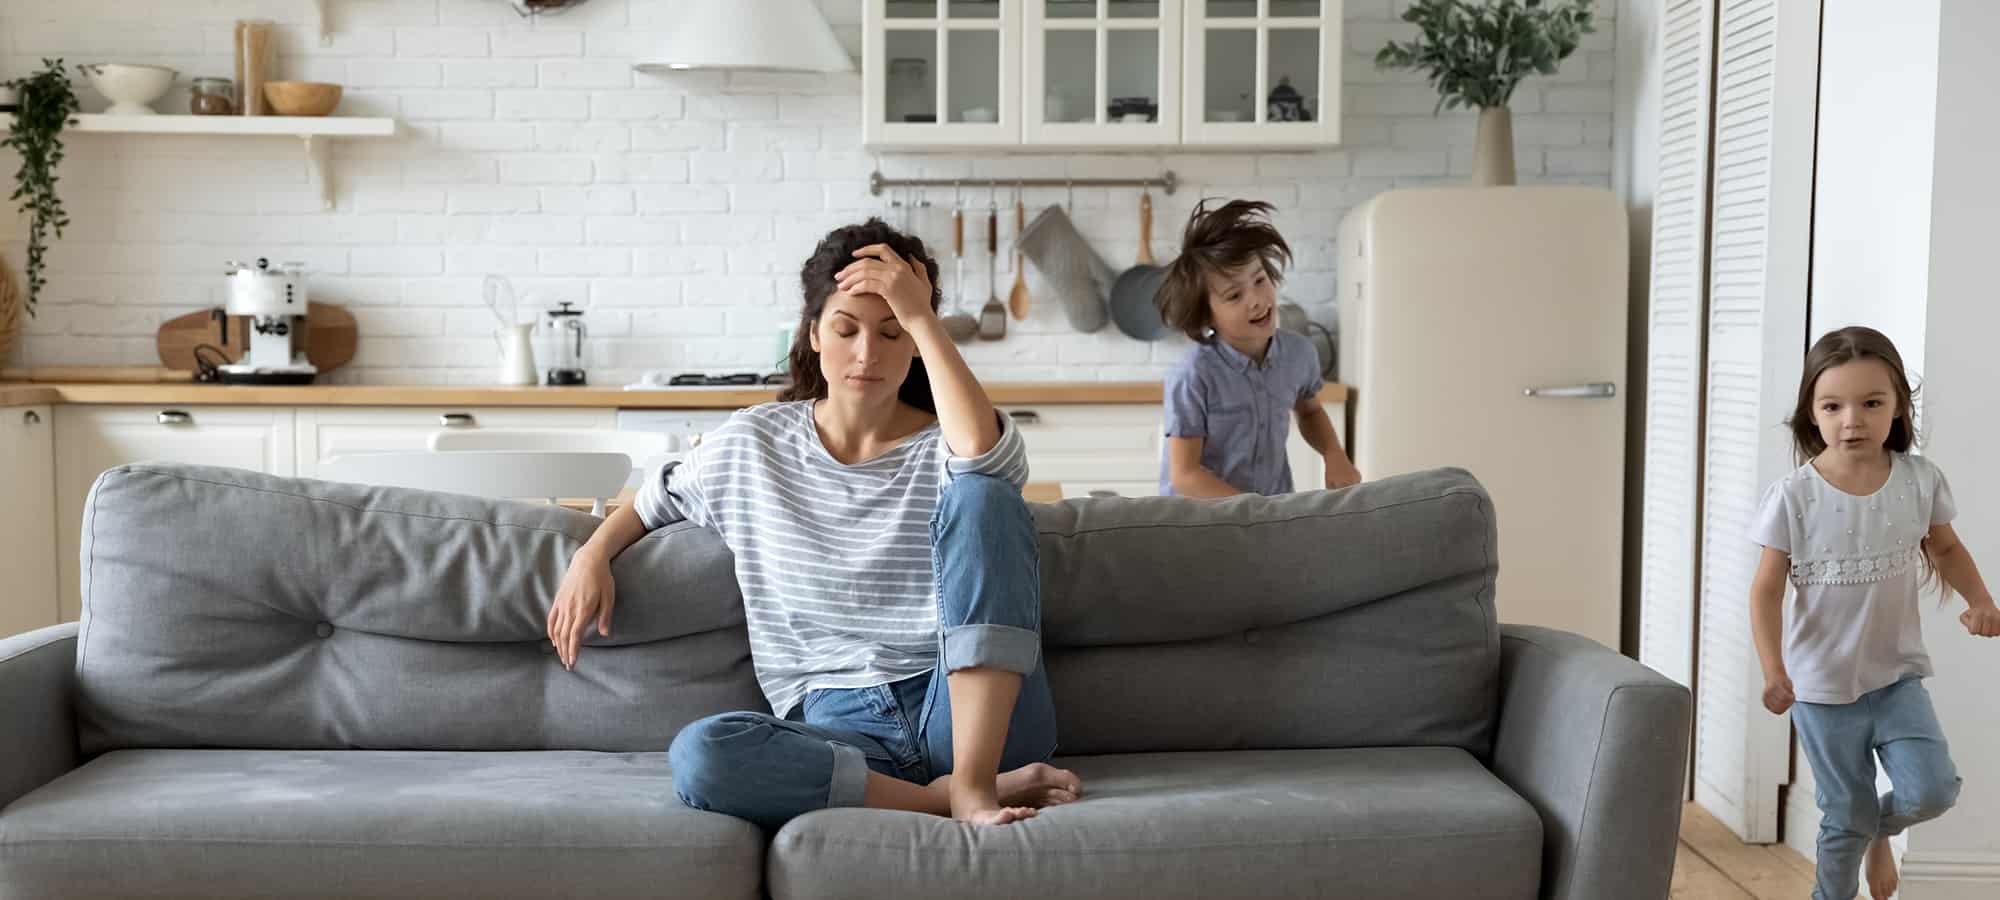 woman with low tolerance levels sits on couch frustrated as children run around her